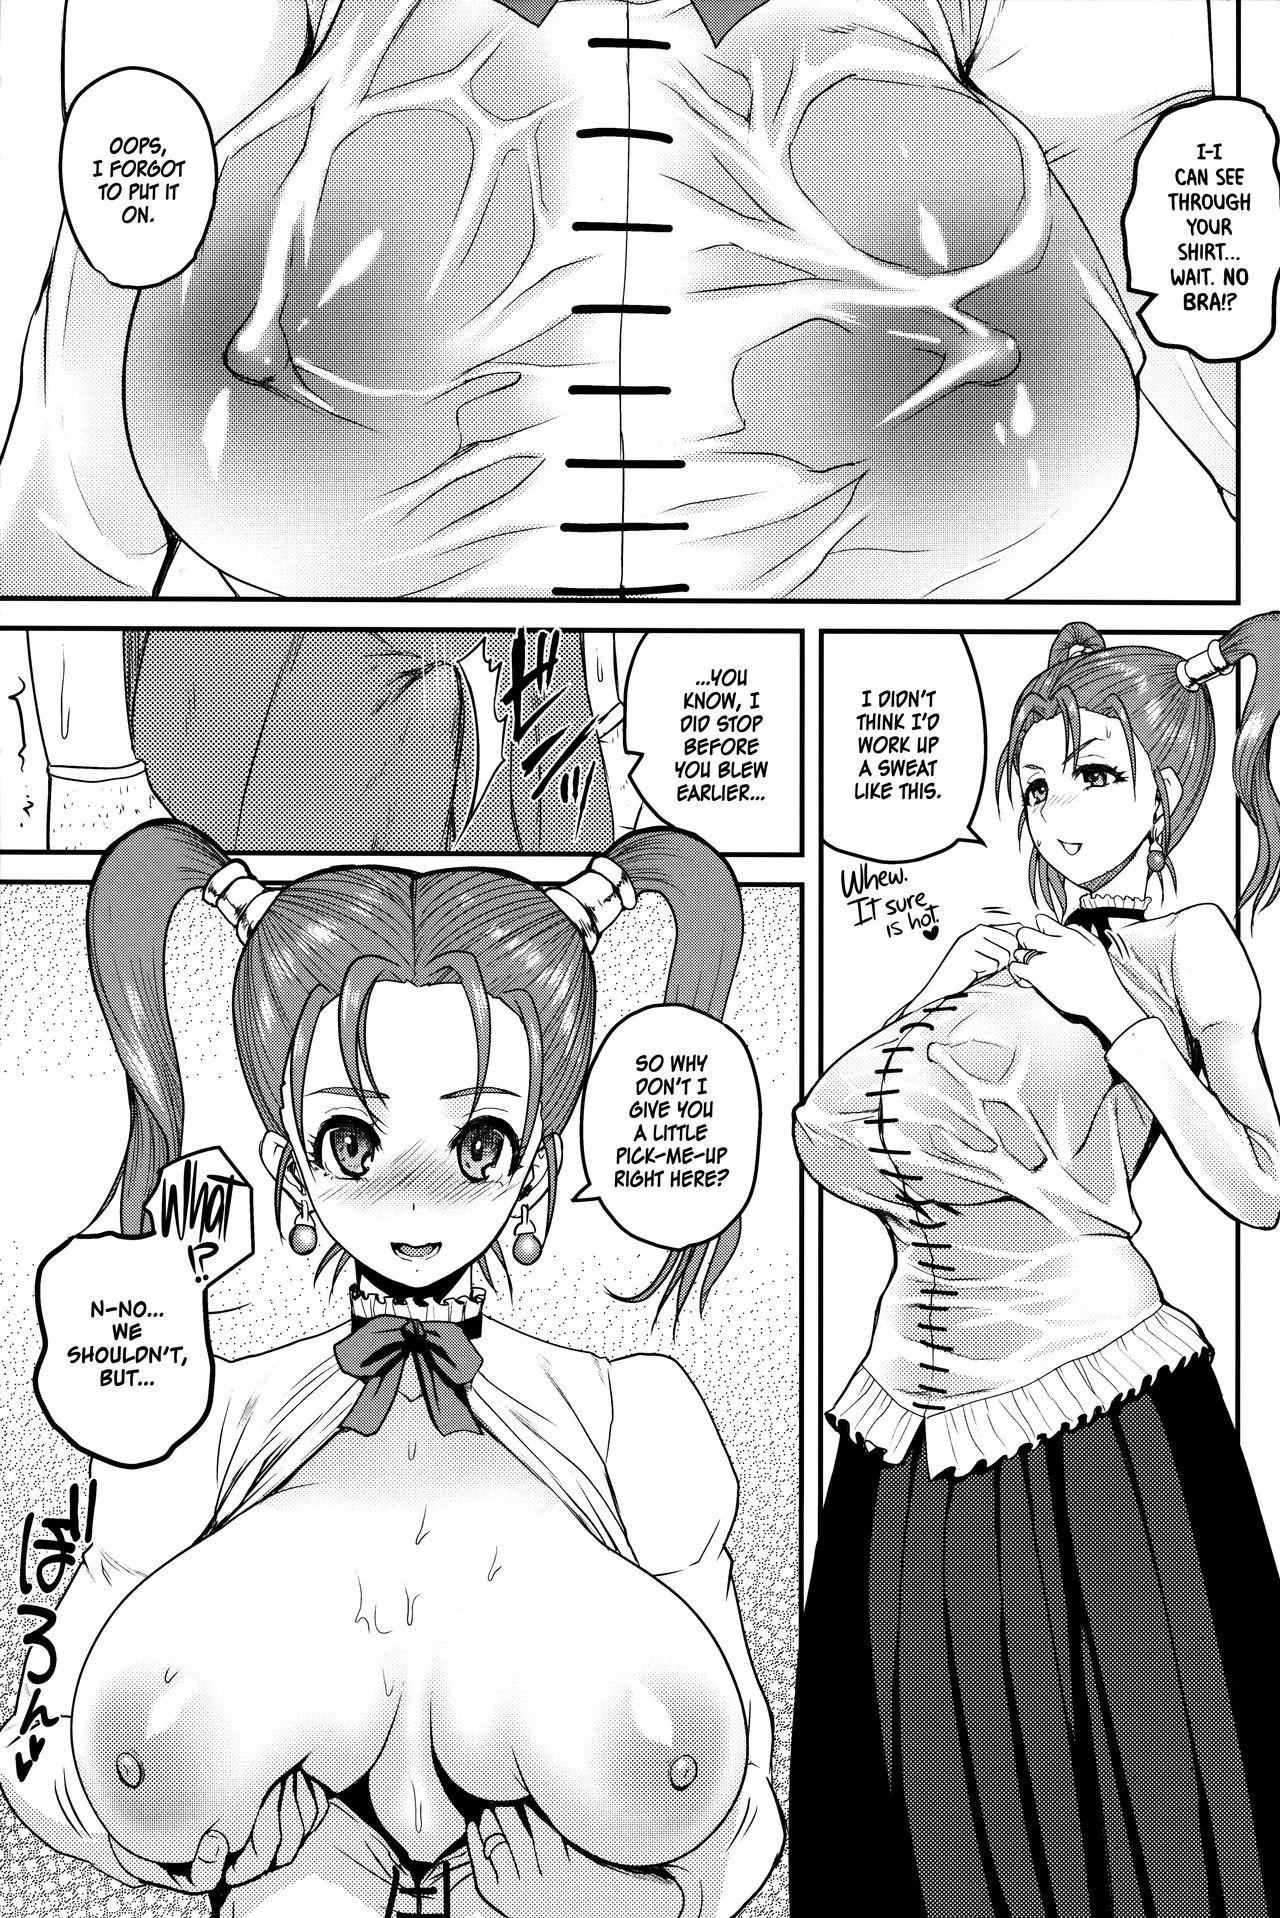 Creampies Yome no Iroke ga Tsuyosugiru | My Wife Has Too Much Sex Appeal - Dragon quest viii Freckles - Page 10